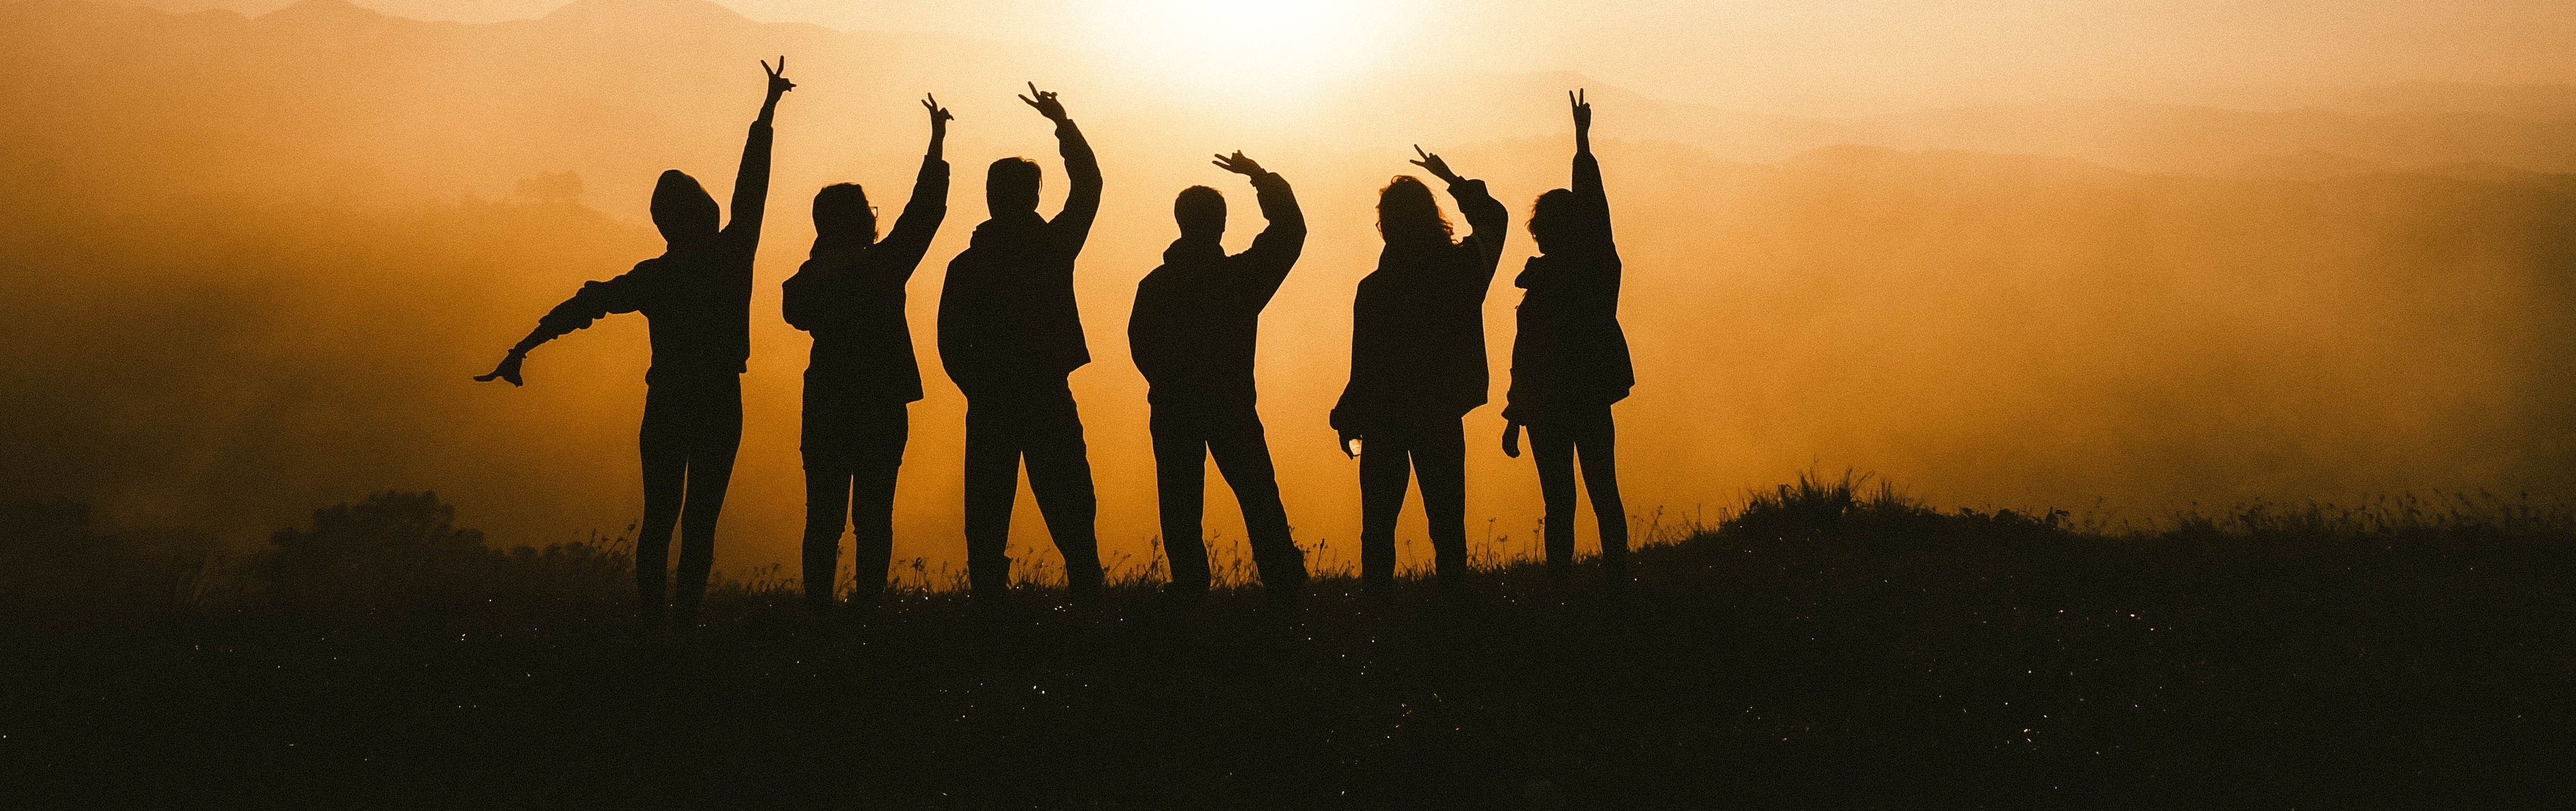 Silhouette of a group of friends with arms raised atop a mountain peak during sunset